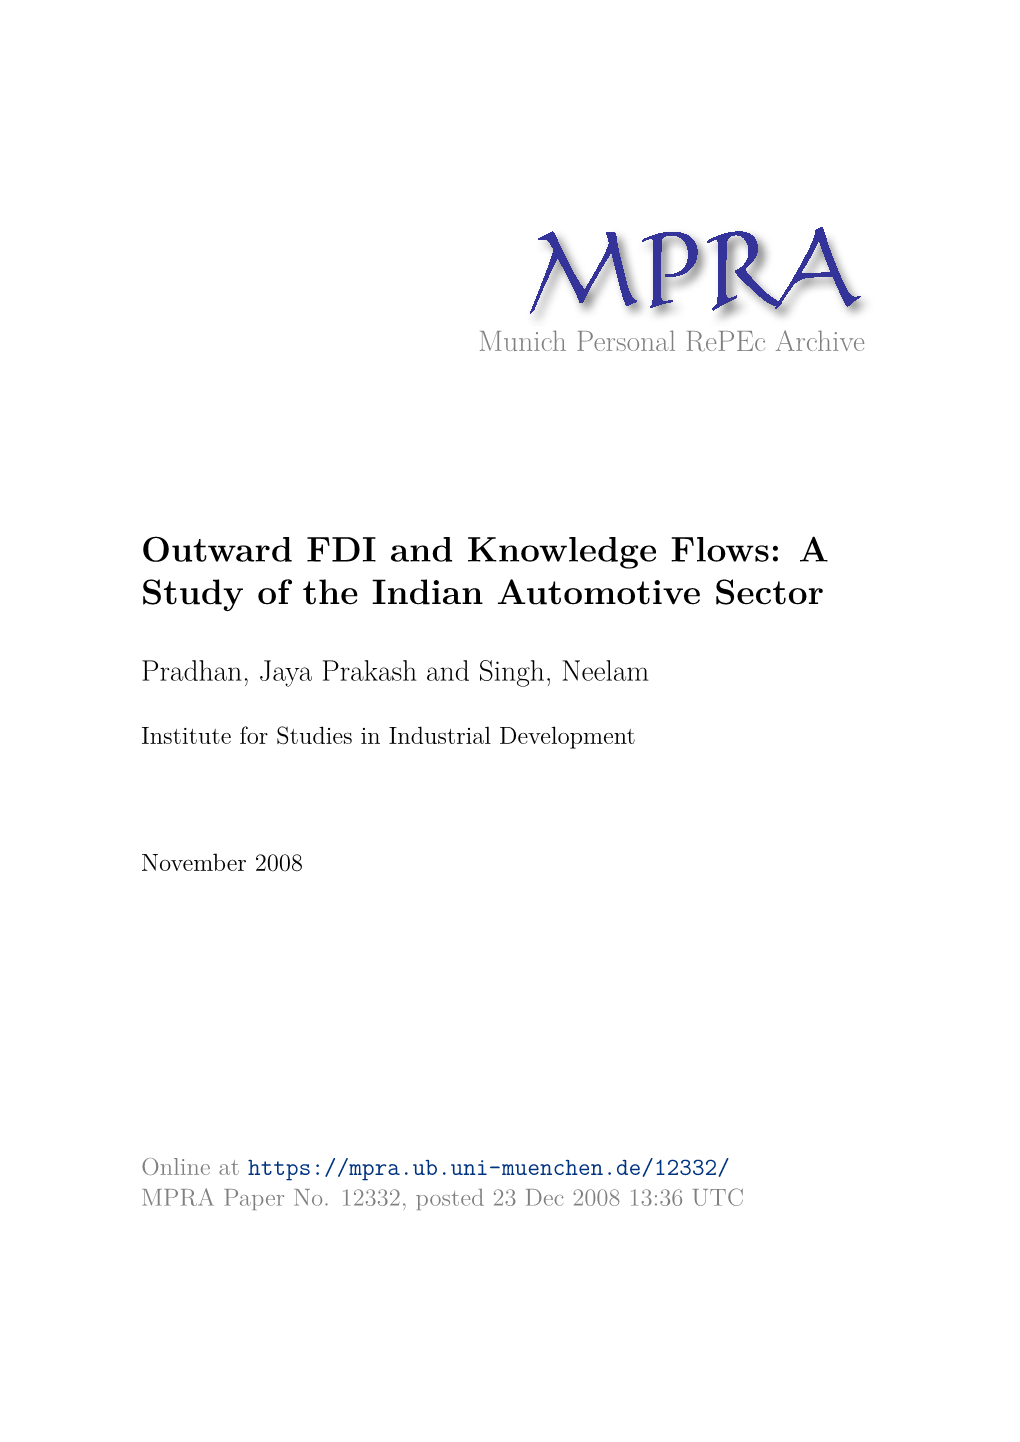 Outward FDI and Knowledge Flows: a Study of the Indian Automotive Sector